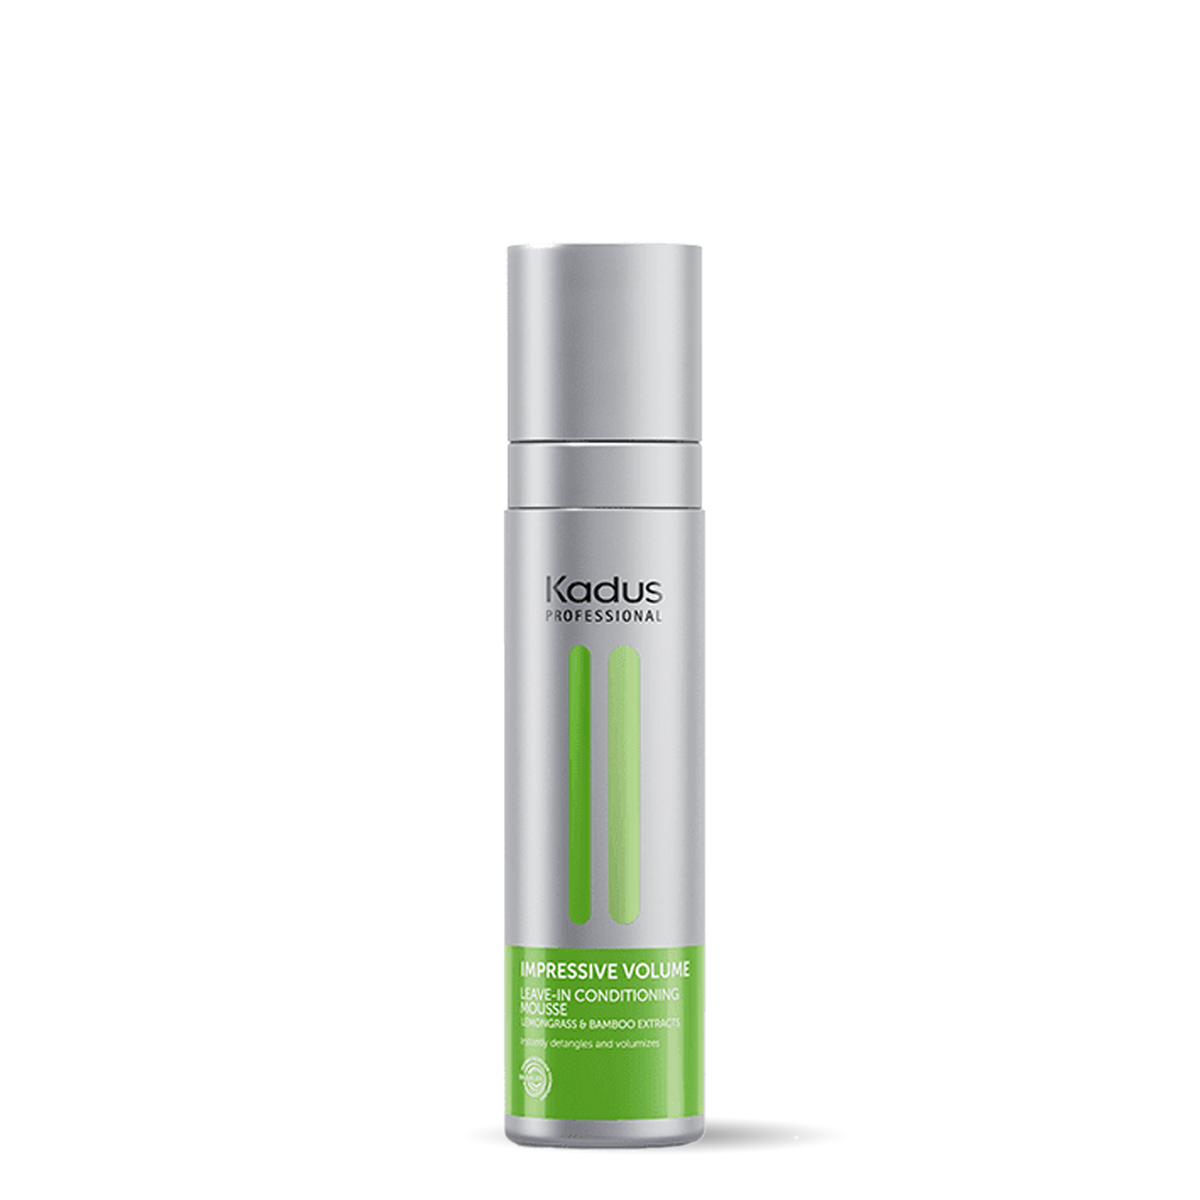 Kadus Impressive Volume Conditioning Mousse 200ml - by Kadus Professionals |ProCare Outlet|